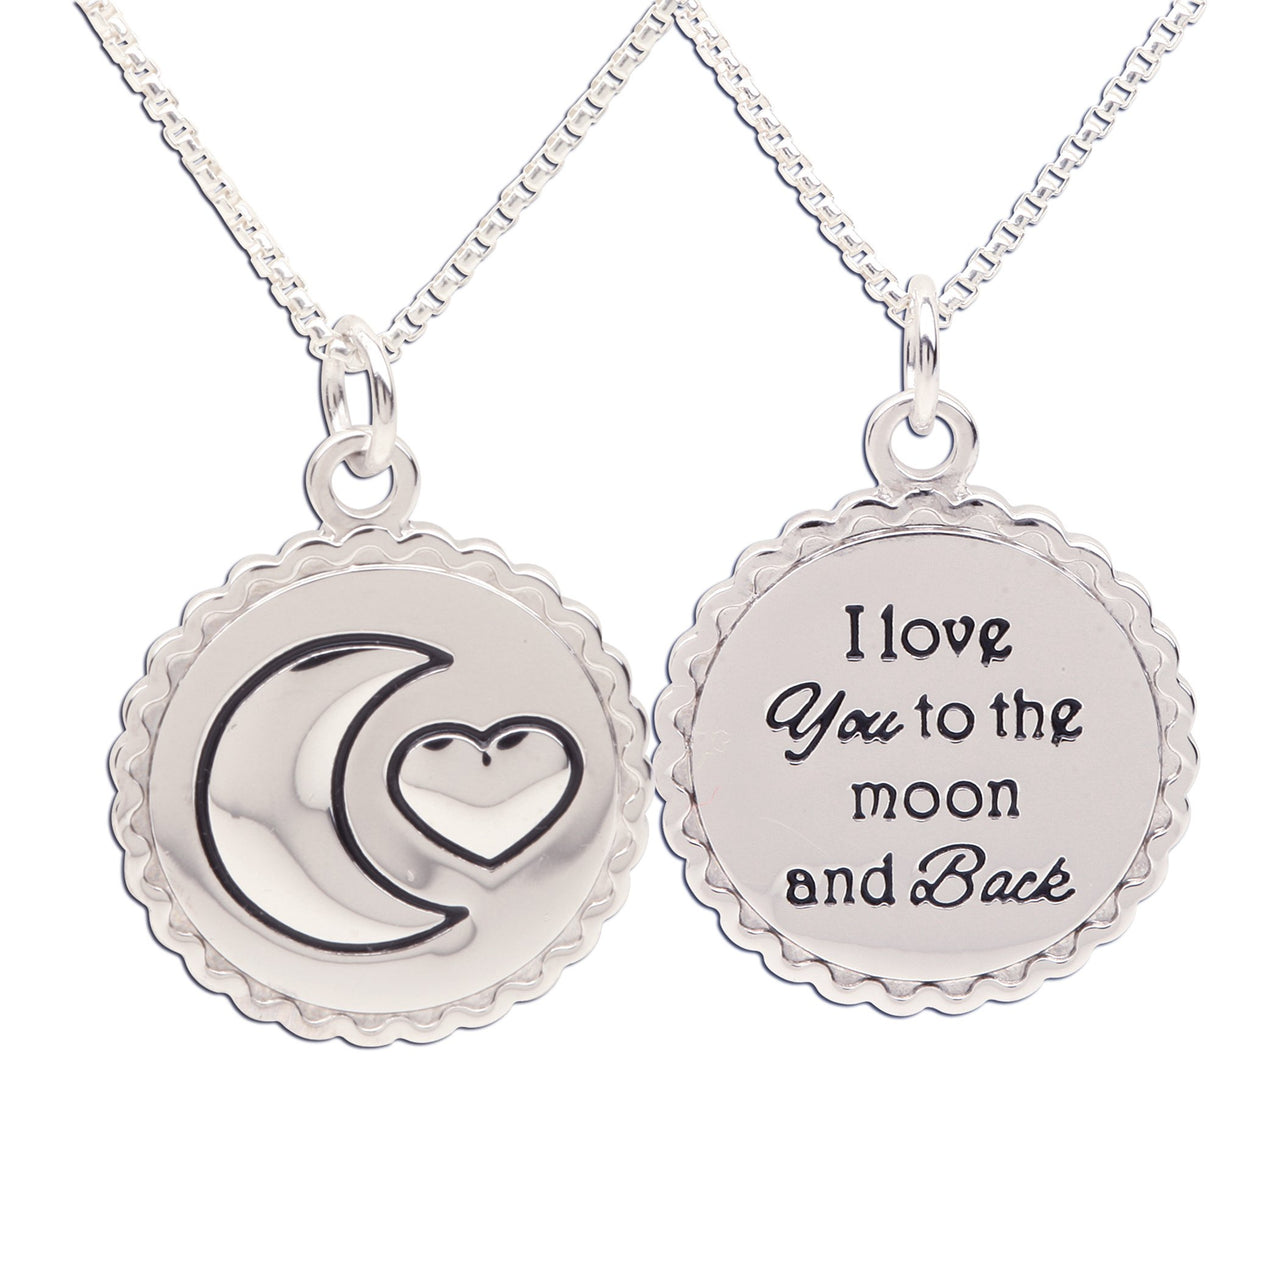 Cherished Moments Sterling Silver I Love You to the Moon and Back Necklace